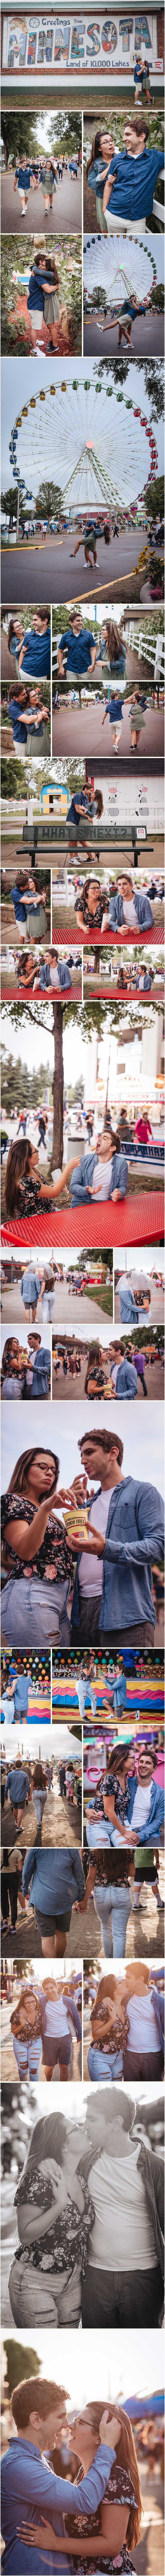 Minnesota State Fair Engagement session photos and tips